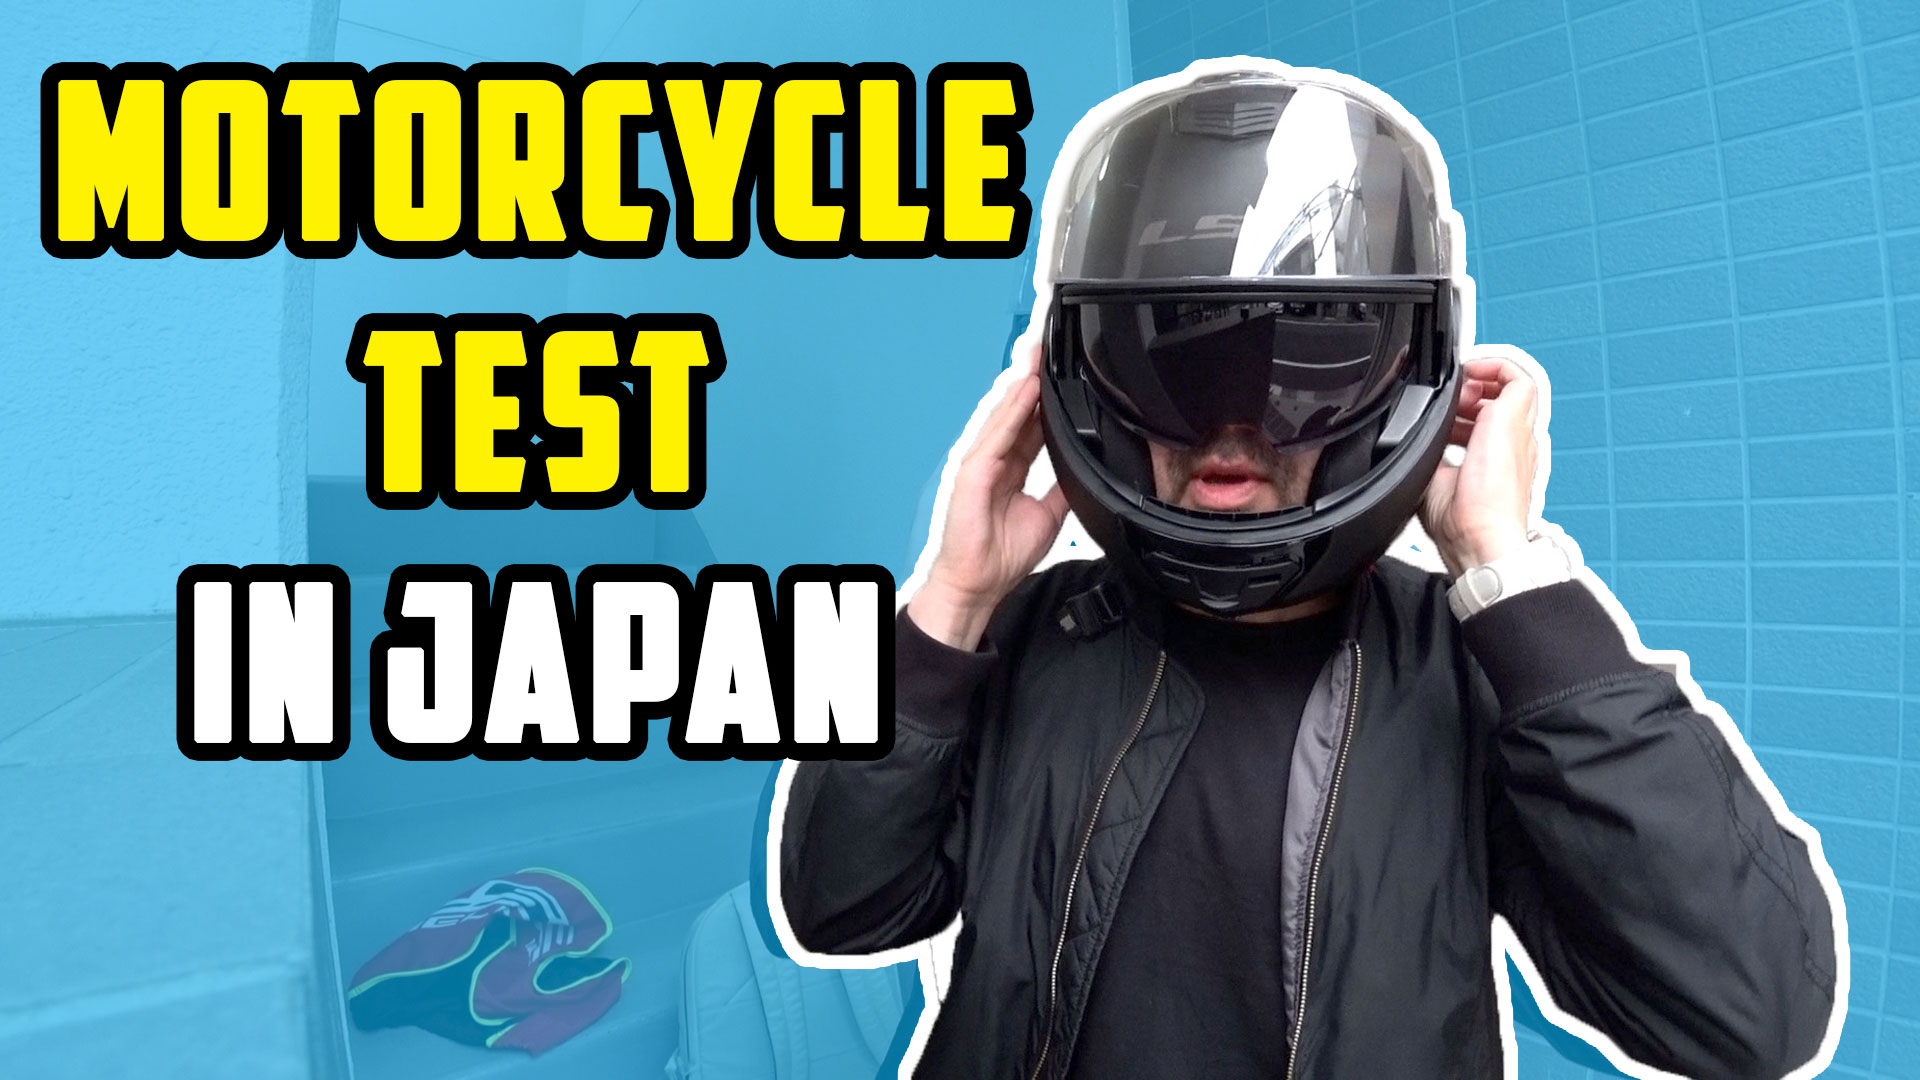 Motorcycle driving test in Japan